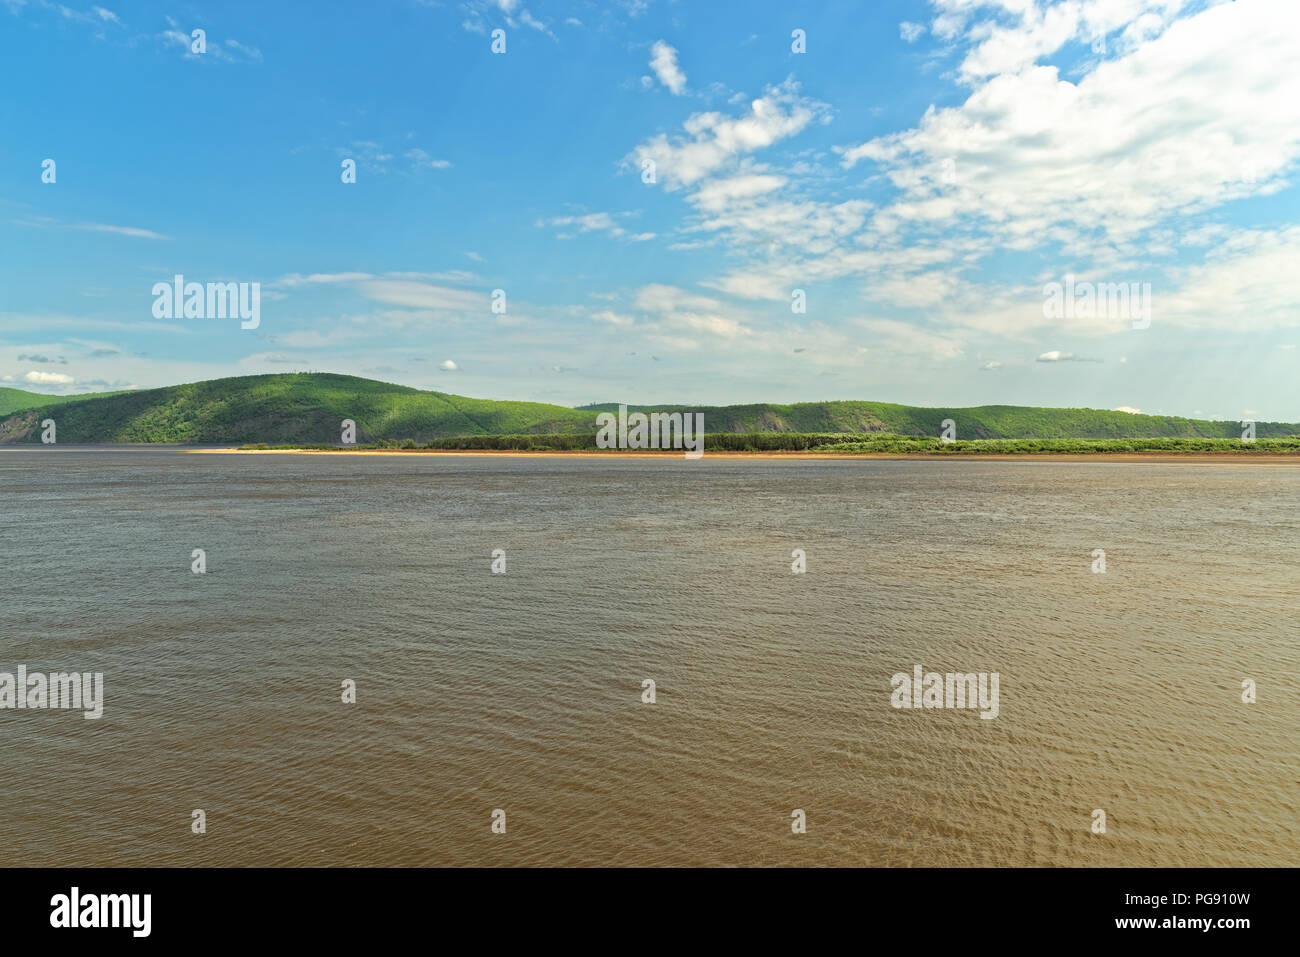 Panoramic view of Amur river and forested hills in the opposite shore, Komsomolsk-on-Amur, Russia Stock Photo